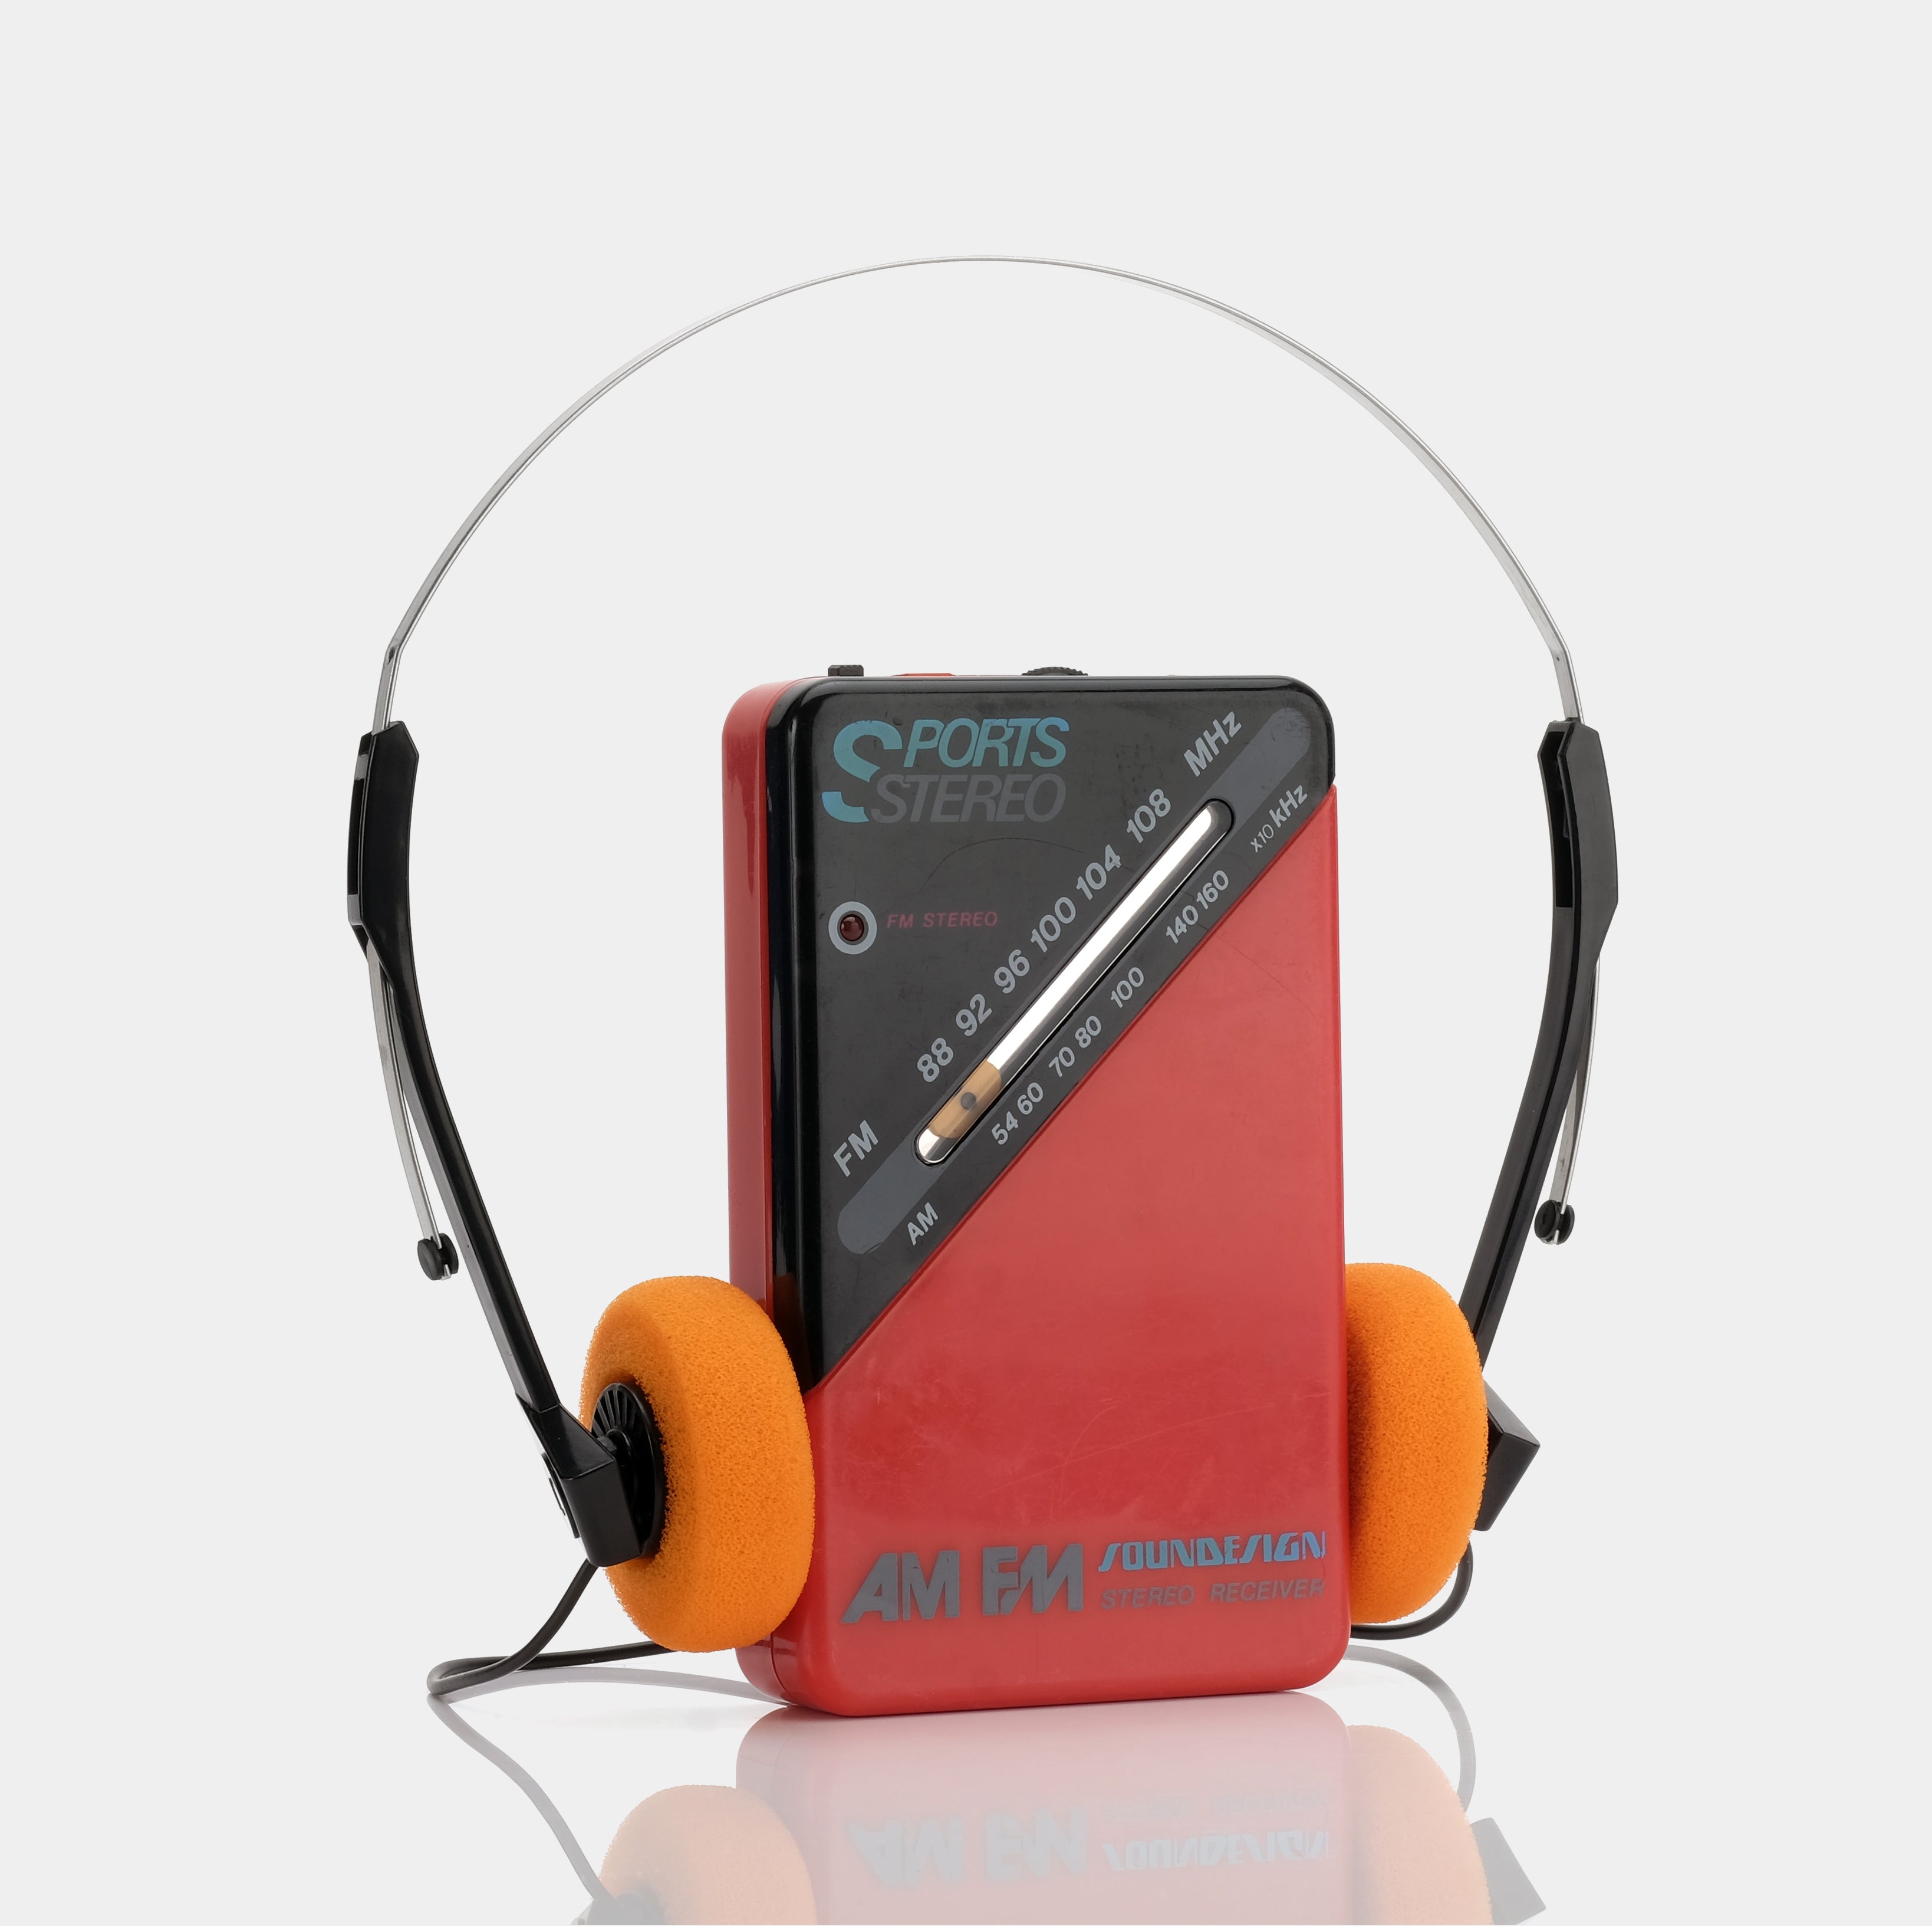 Soundesign Sports 2003RED AM/FM Portable Radio